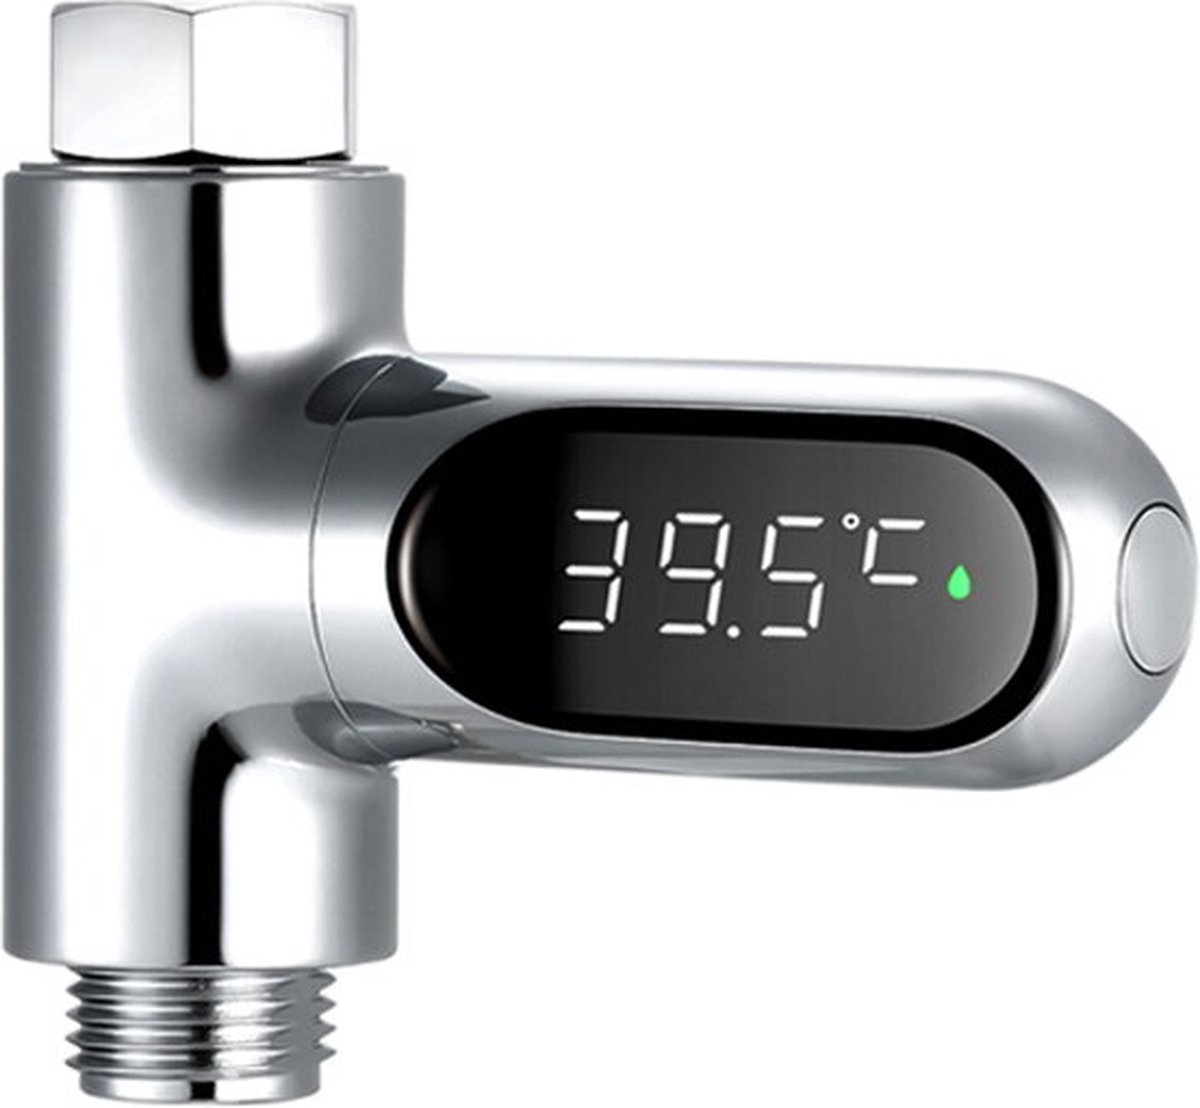 Frobin LED Digitale Douche Thermometer - Temperatuurmeter - Bad Water Thermometer -...